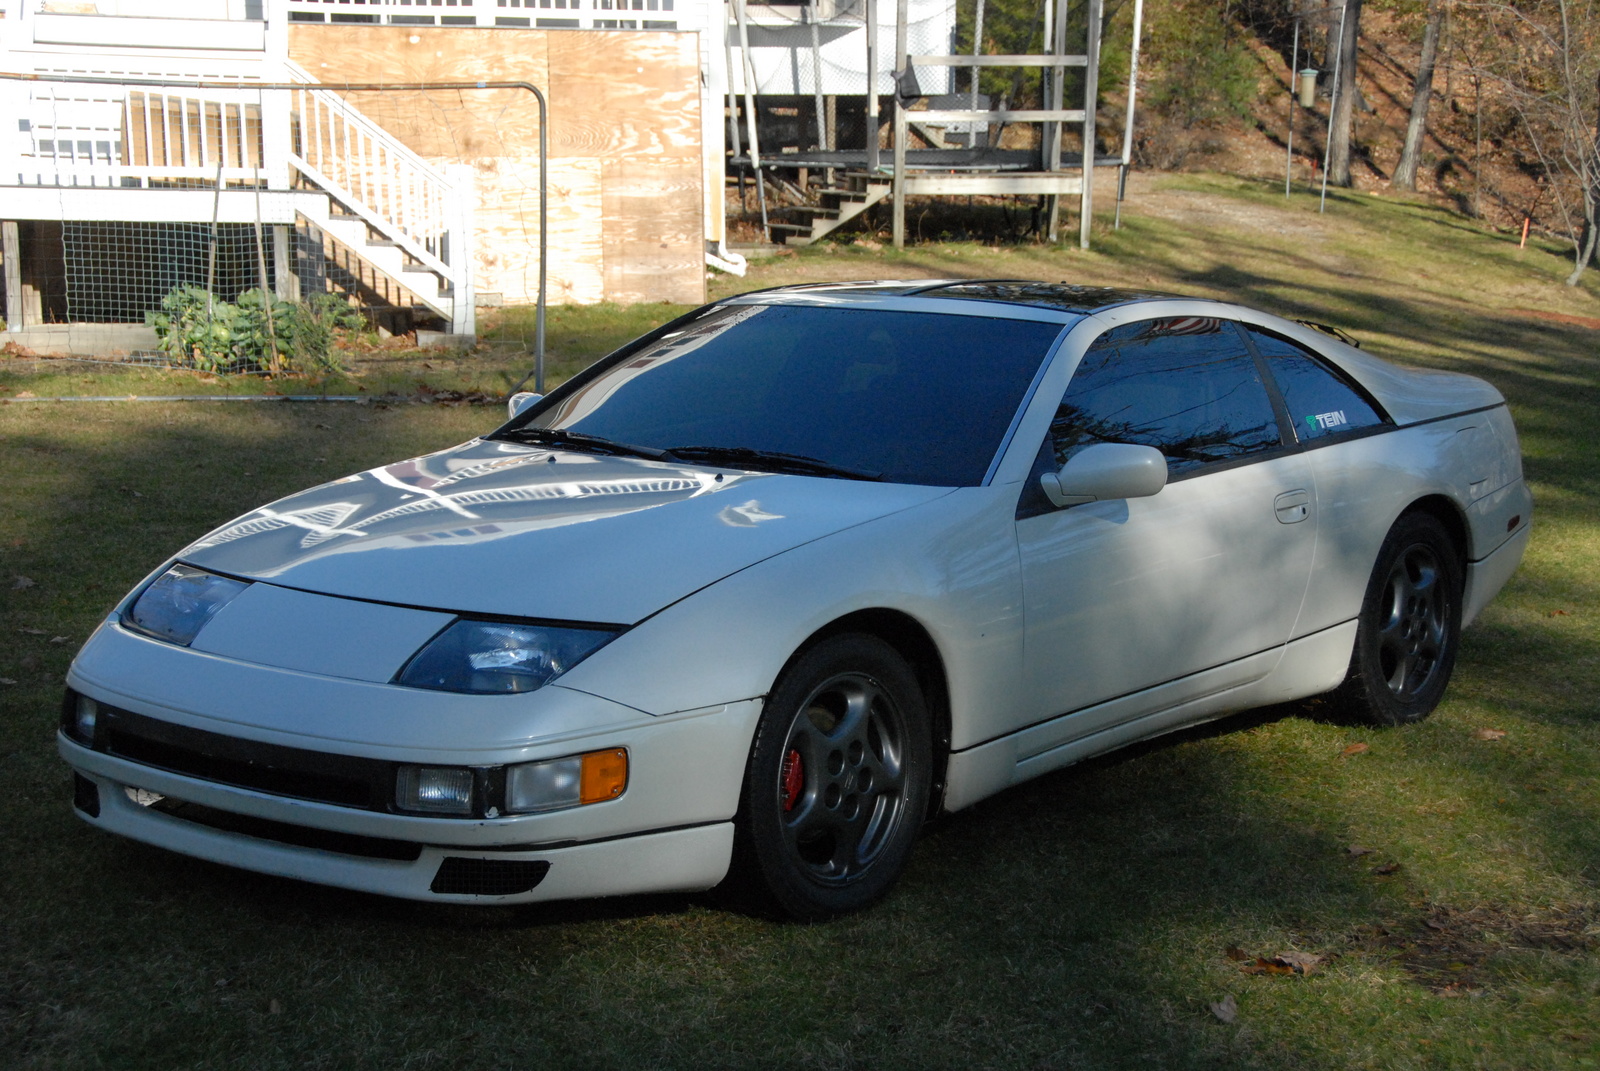 1990 Nissan 300zx images #7